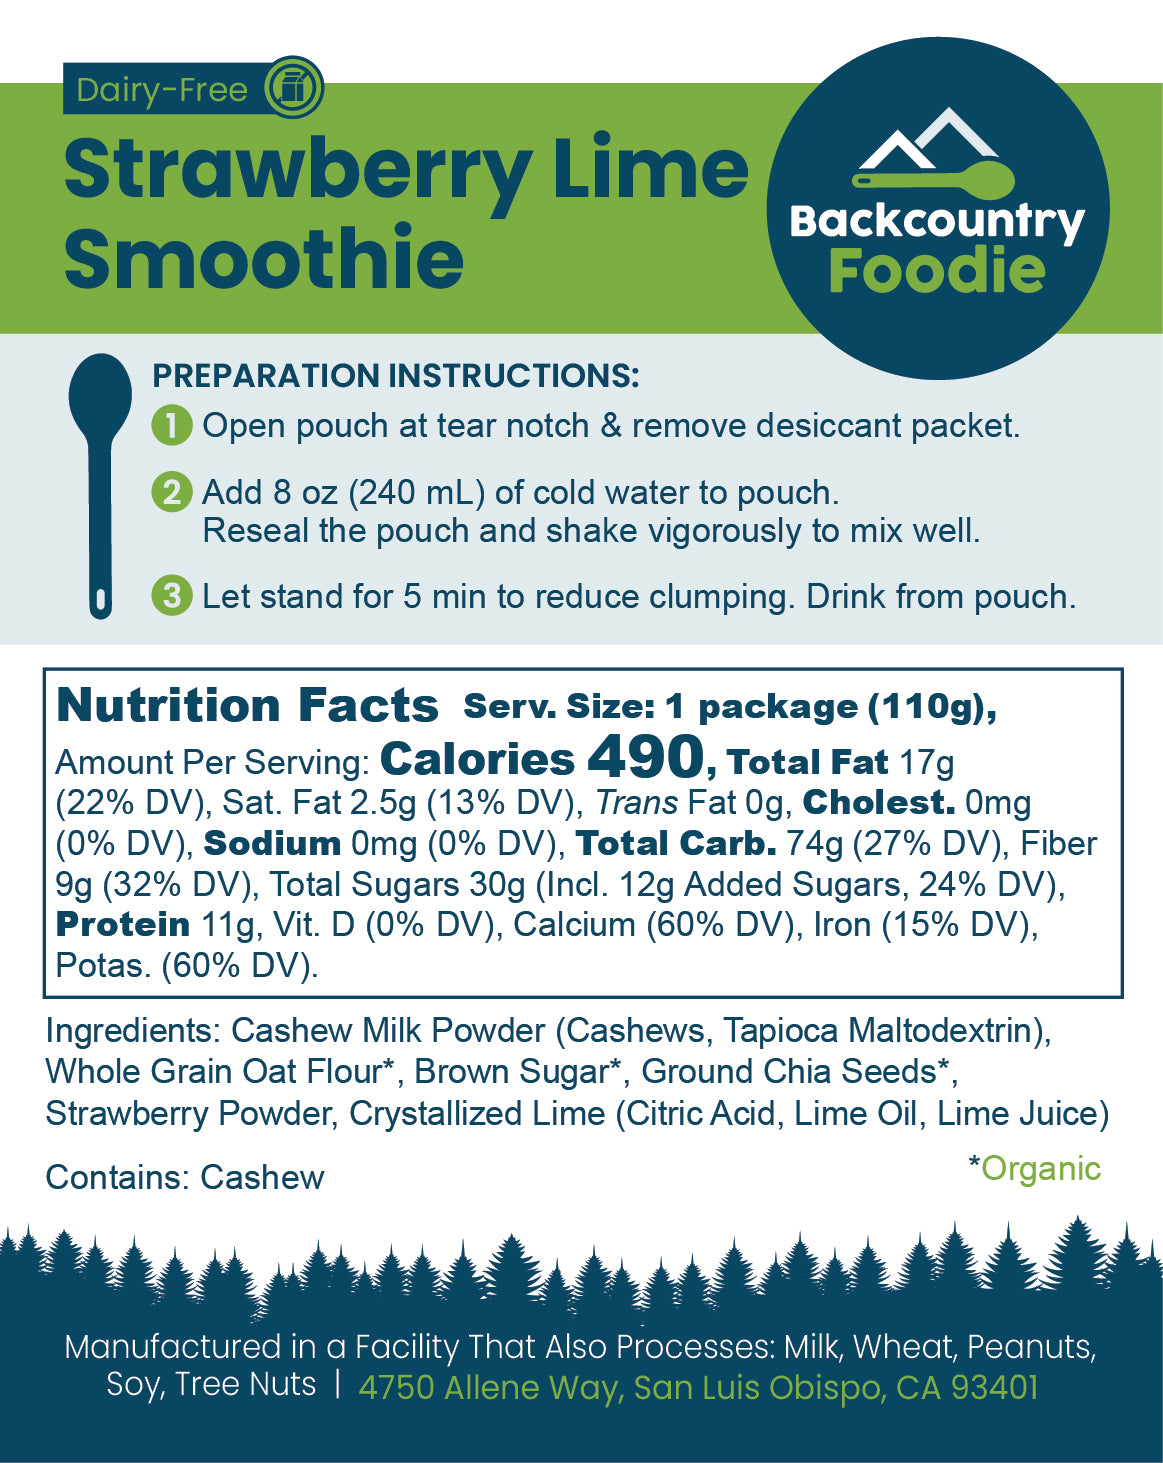 Backcountry Foodie - Strawberry Lime Smoothie, Dairy-Free